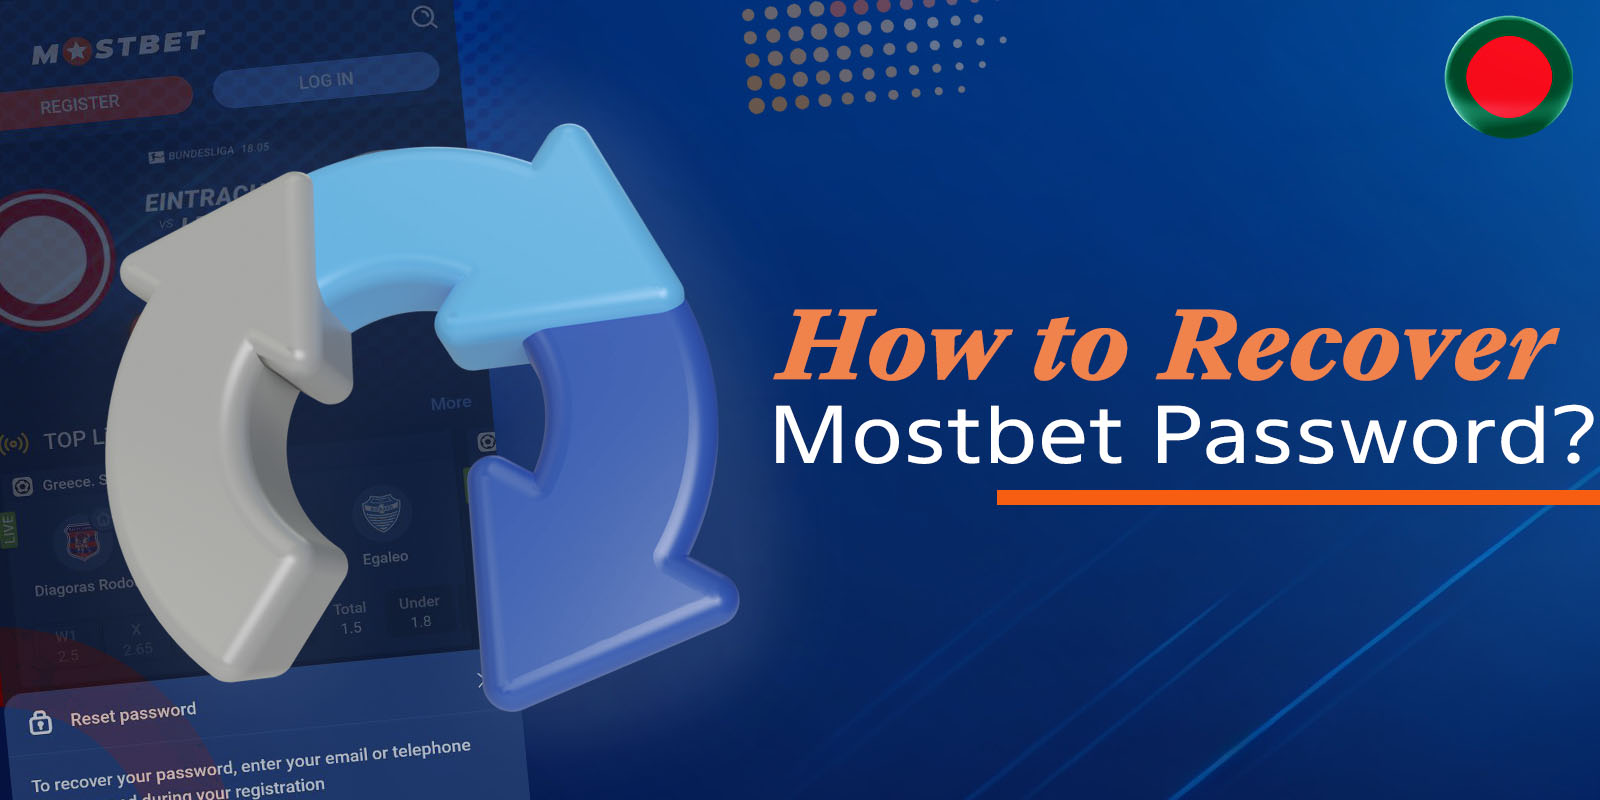 Quick guide on how to update your password on the Mostbet platform